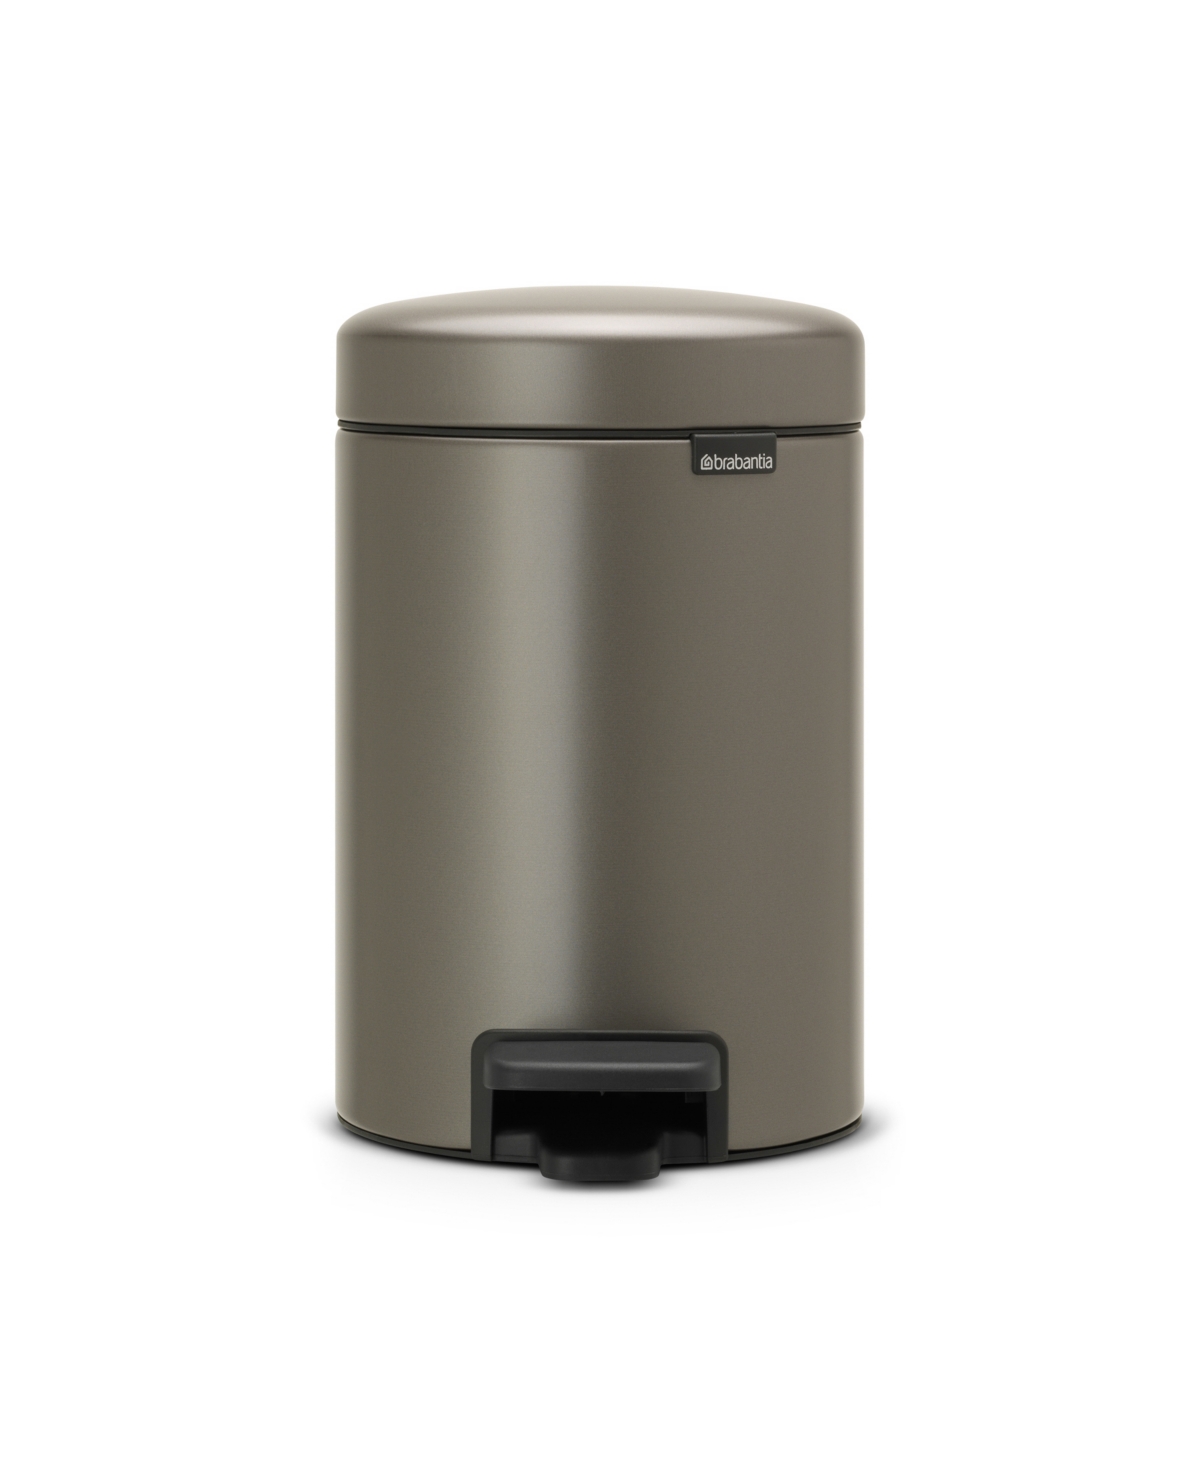 Brabantia New Icon Step On Trash Can, 0.8 Gallon, 3 Liter In Platinum